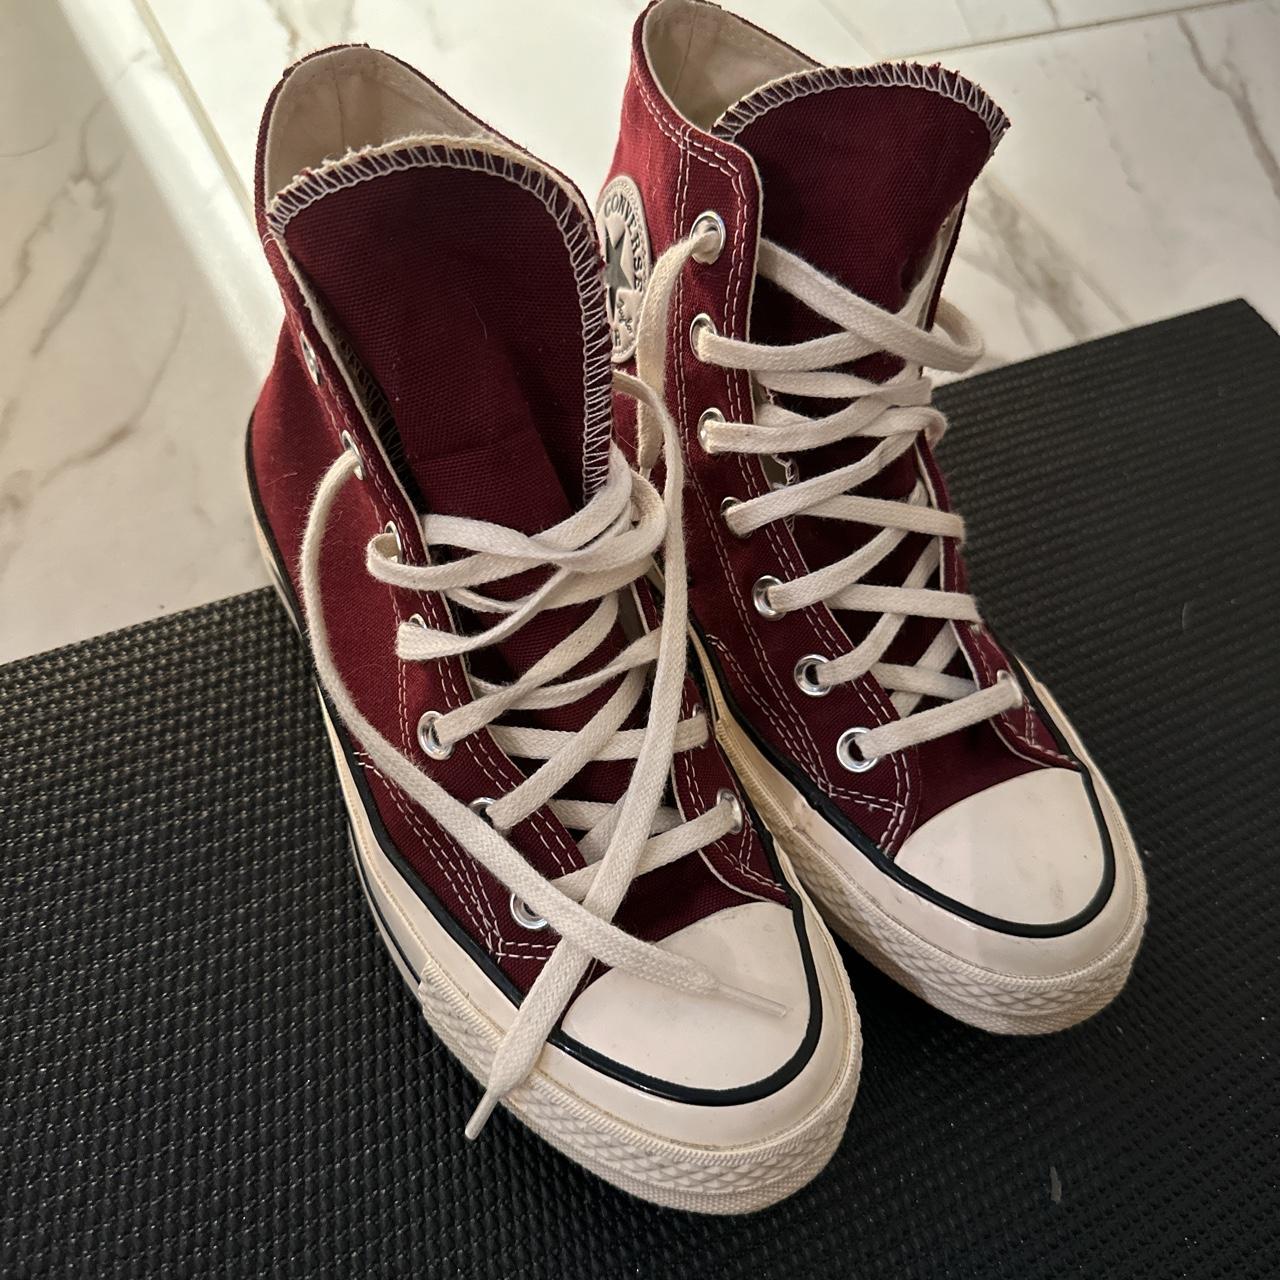 maroon chuck 70s size wm 6.5 they do fit a little... - Depop